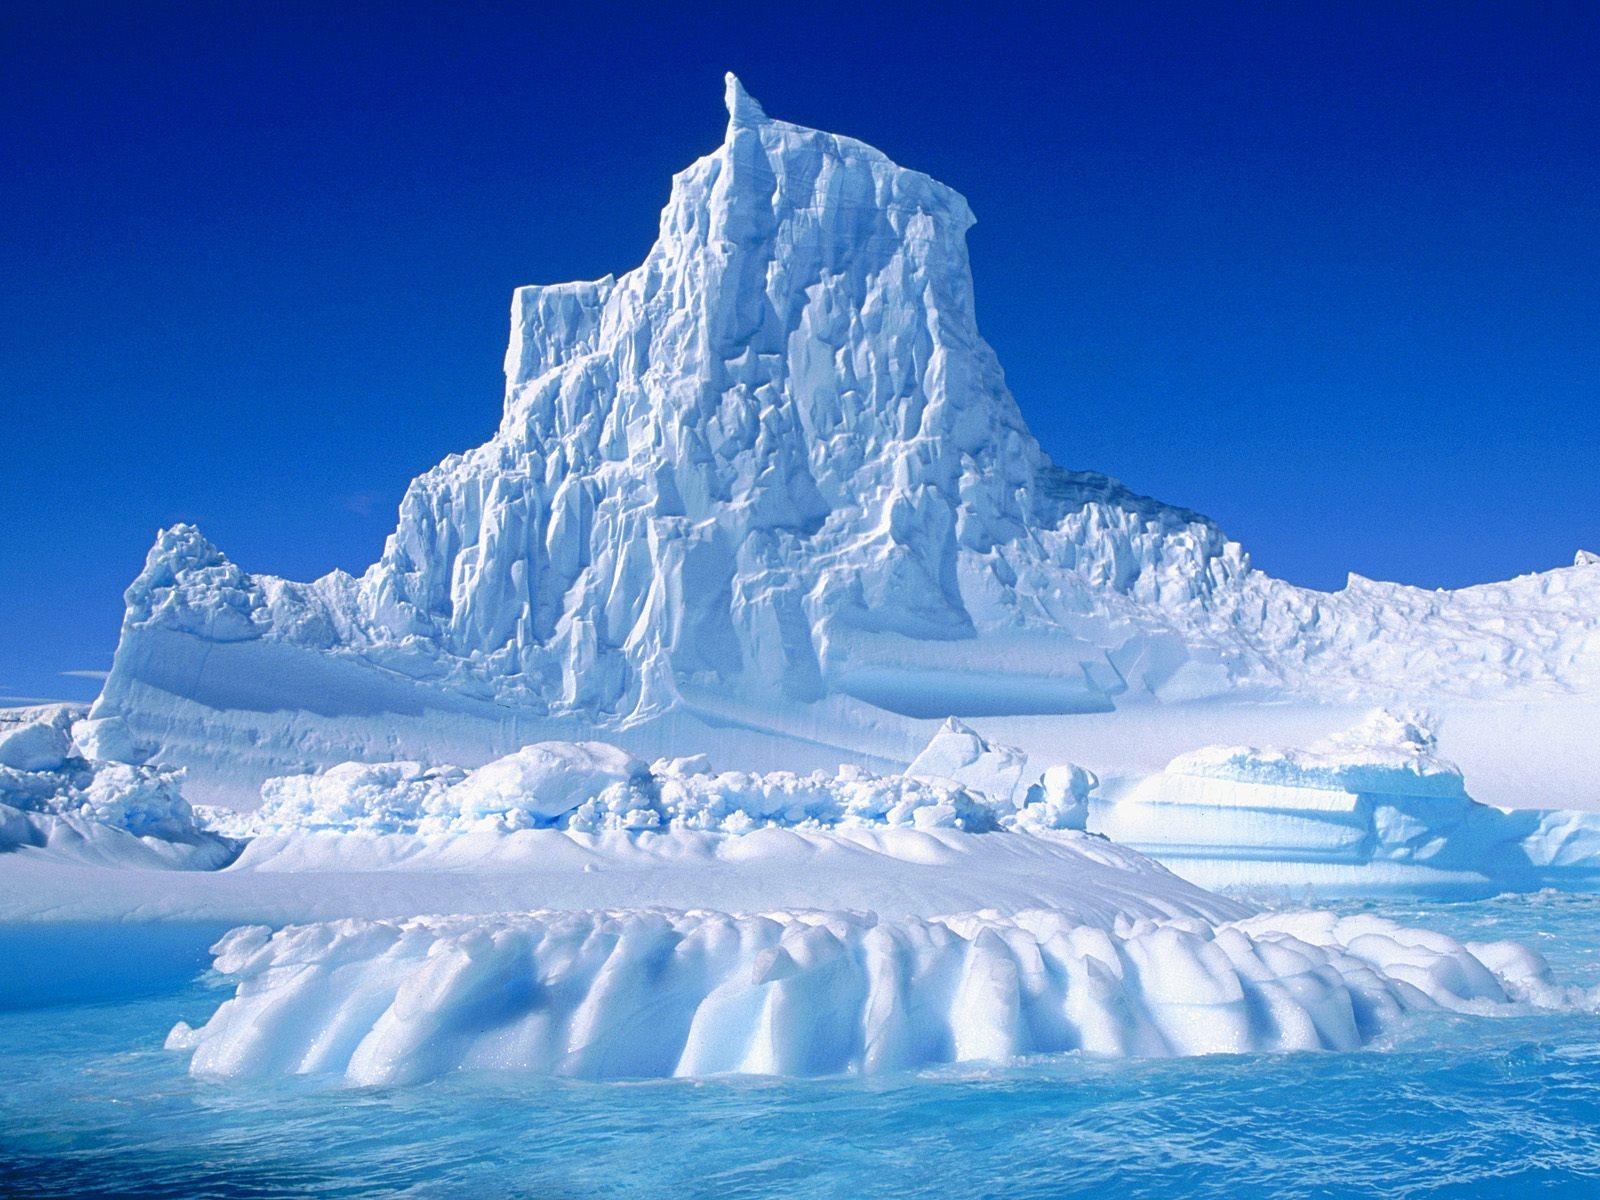 [Eroded+Iceberg+in+the+Lemaire+Channel,+Antarctica.jpg]